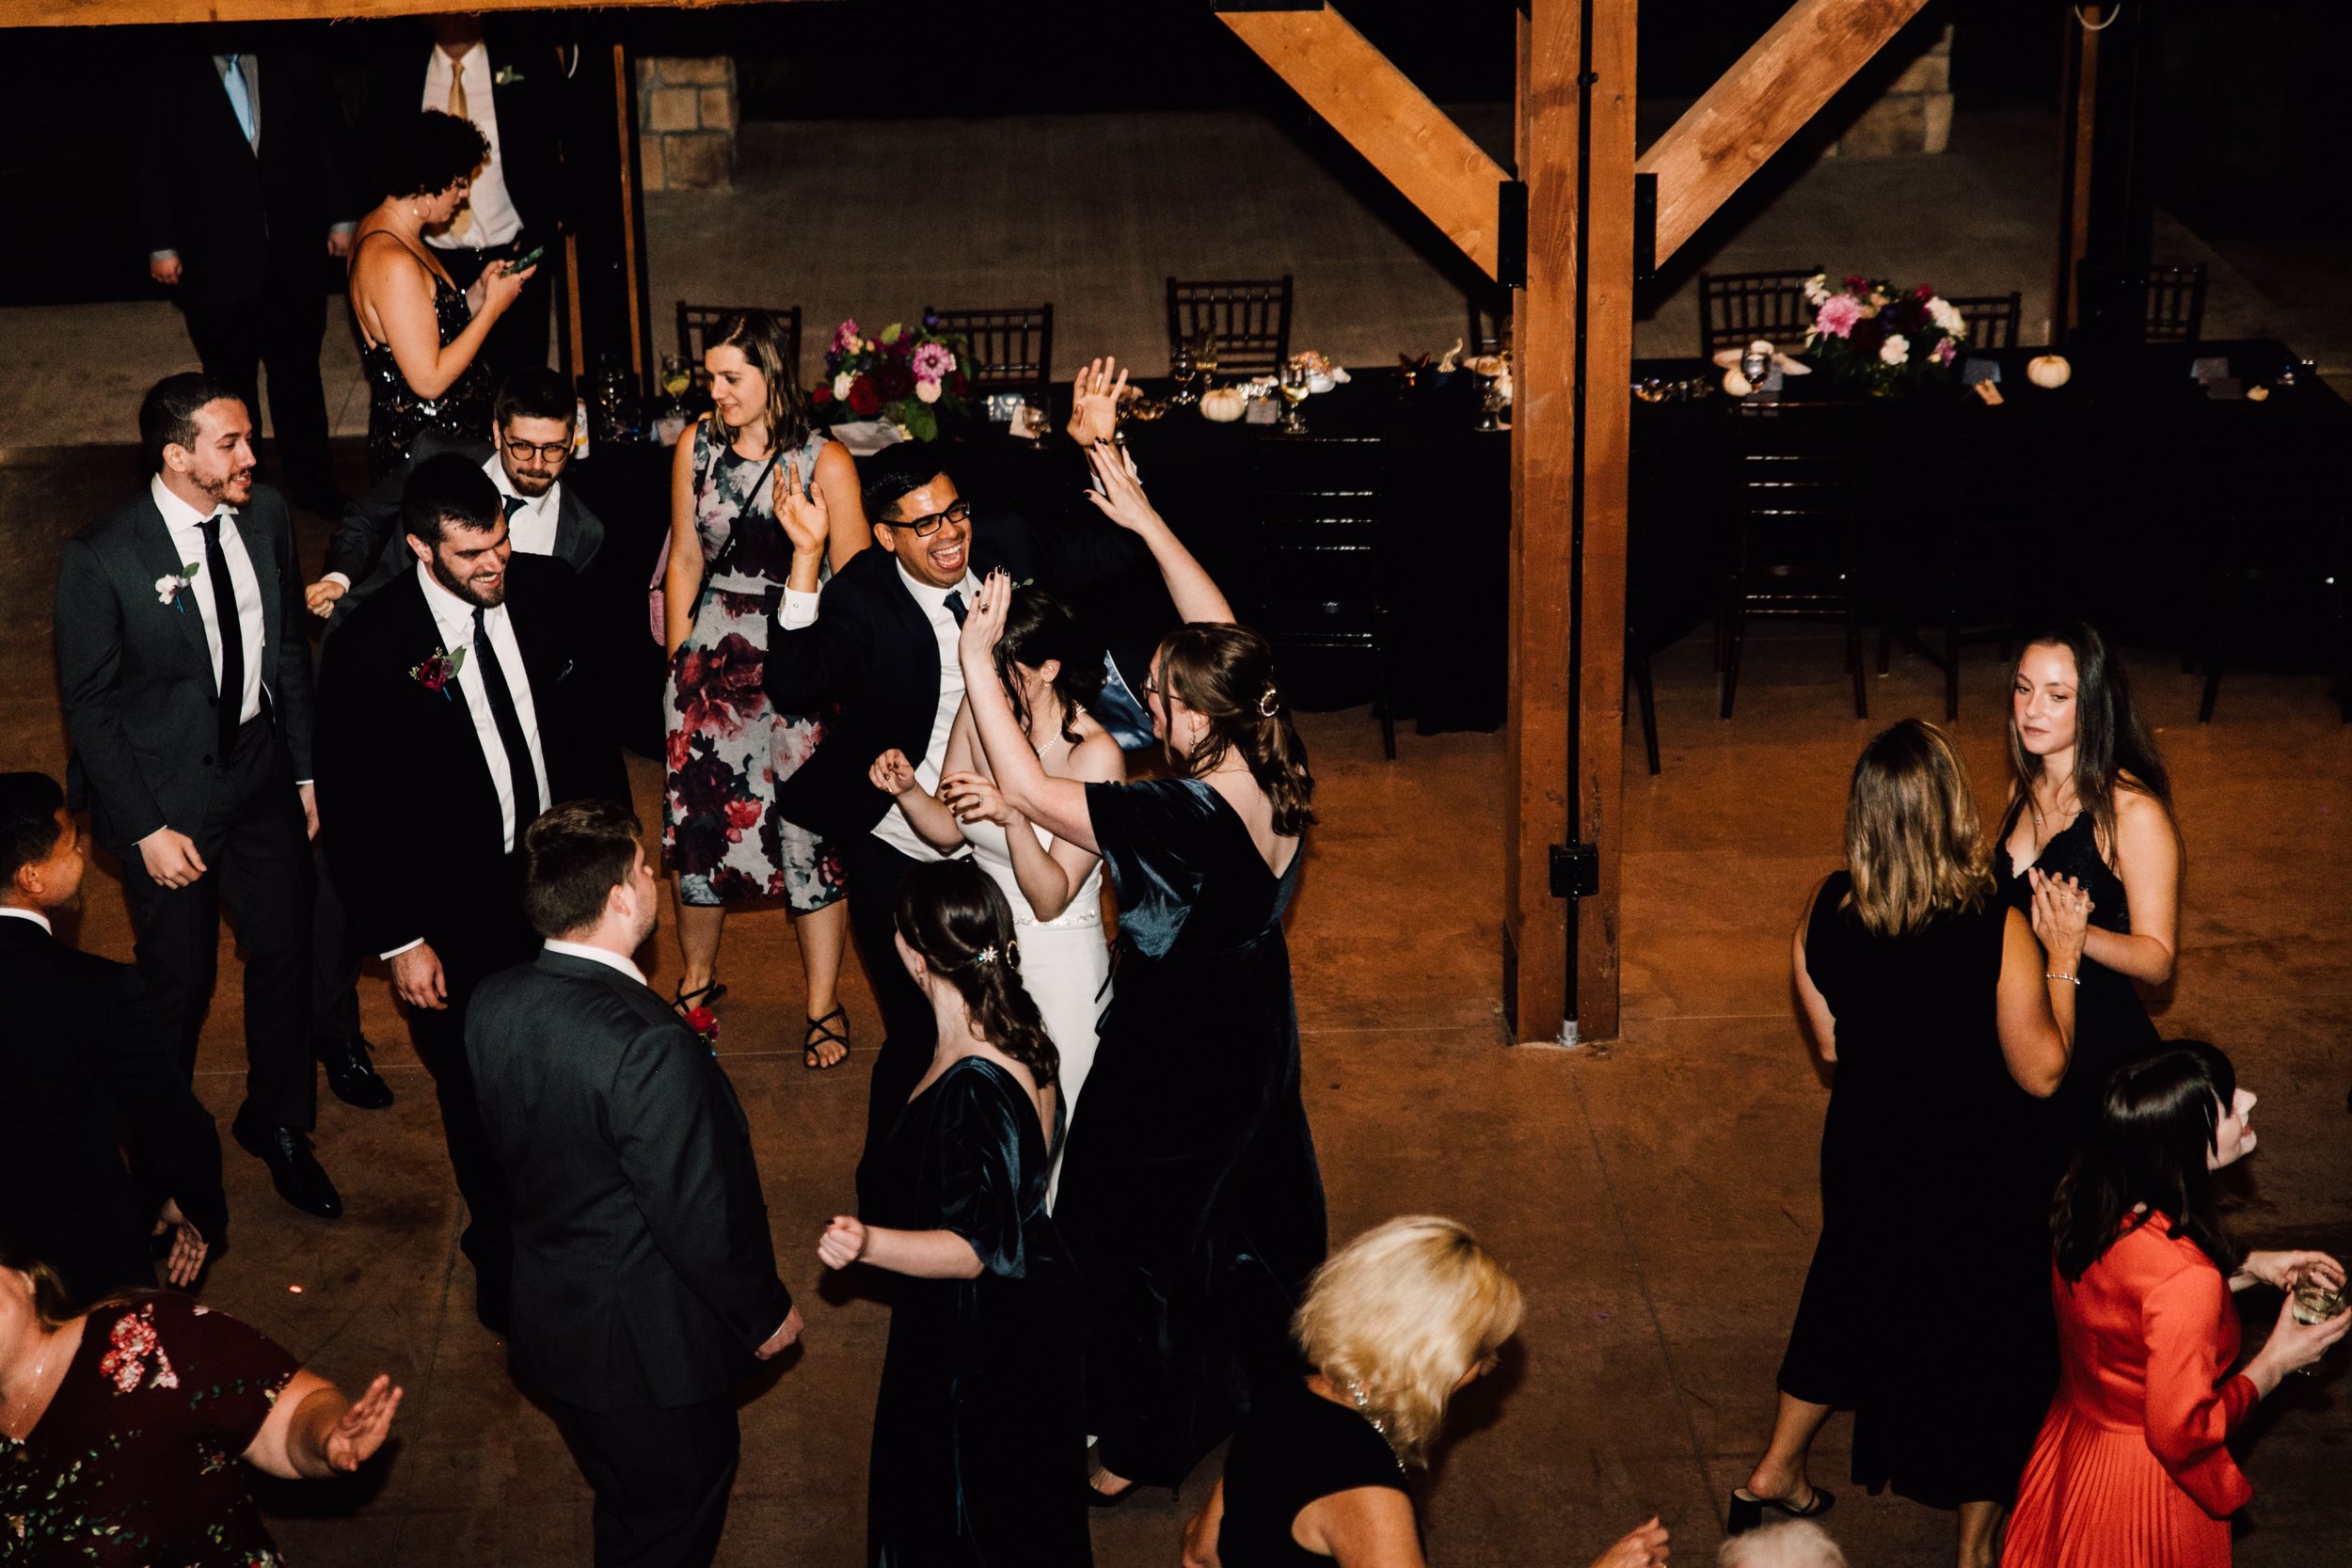  the wedding party and guests dance at a starry night wedding 